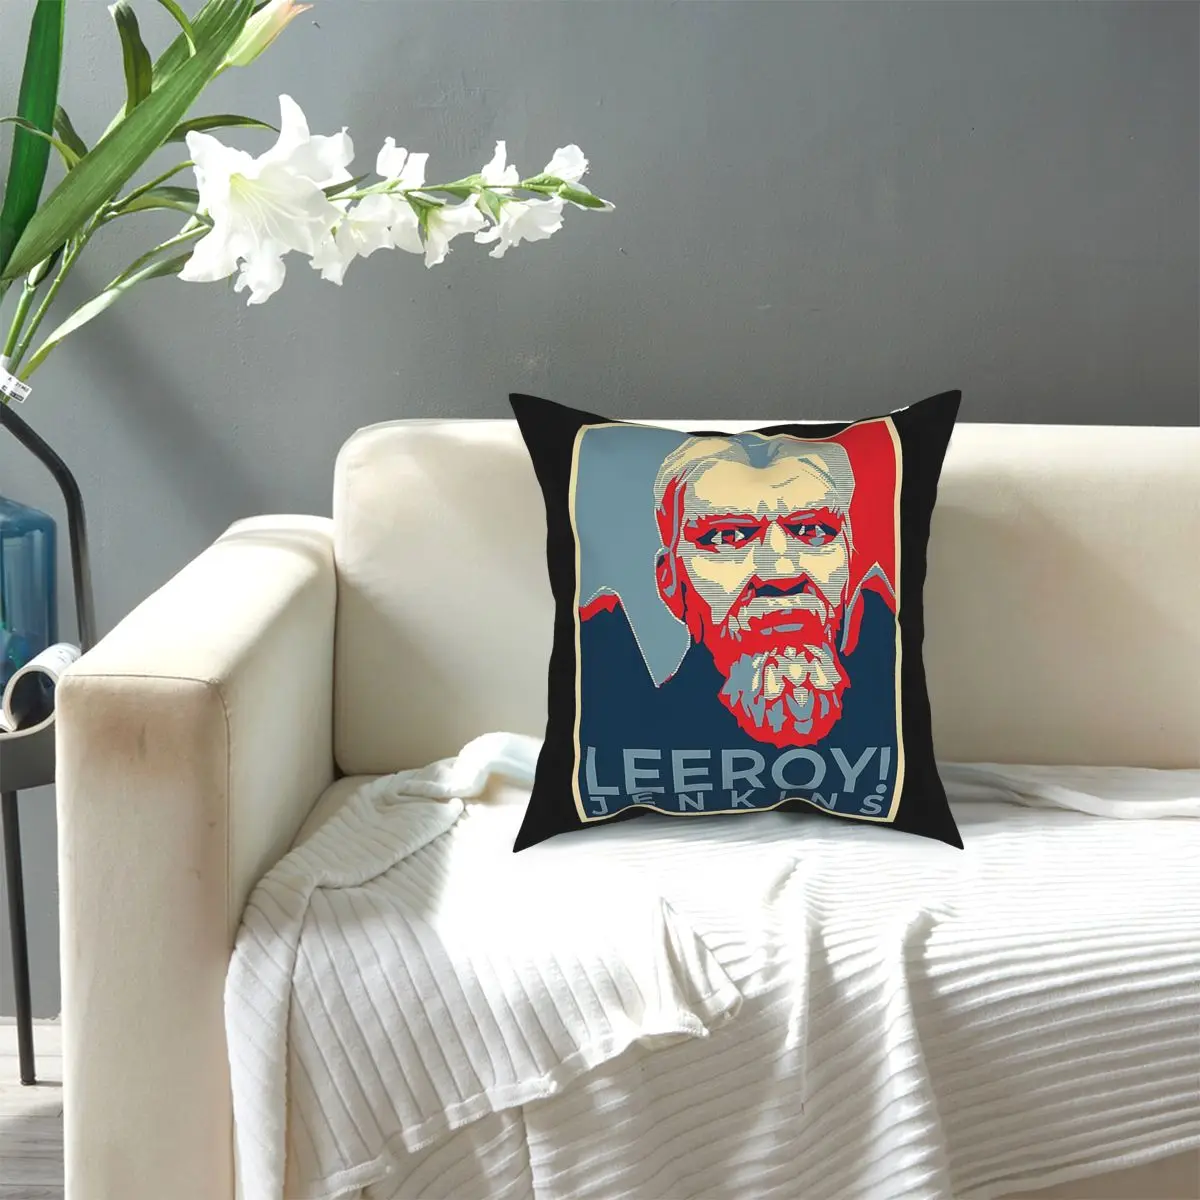 

Leeroy Jenkins Obamized World Of Warcraft Wow Square Pillow Case Polyester Decorative Pillow Casual Pillowcase